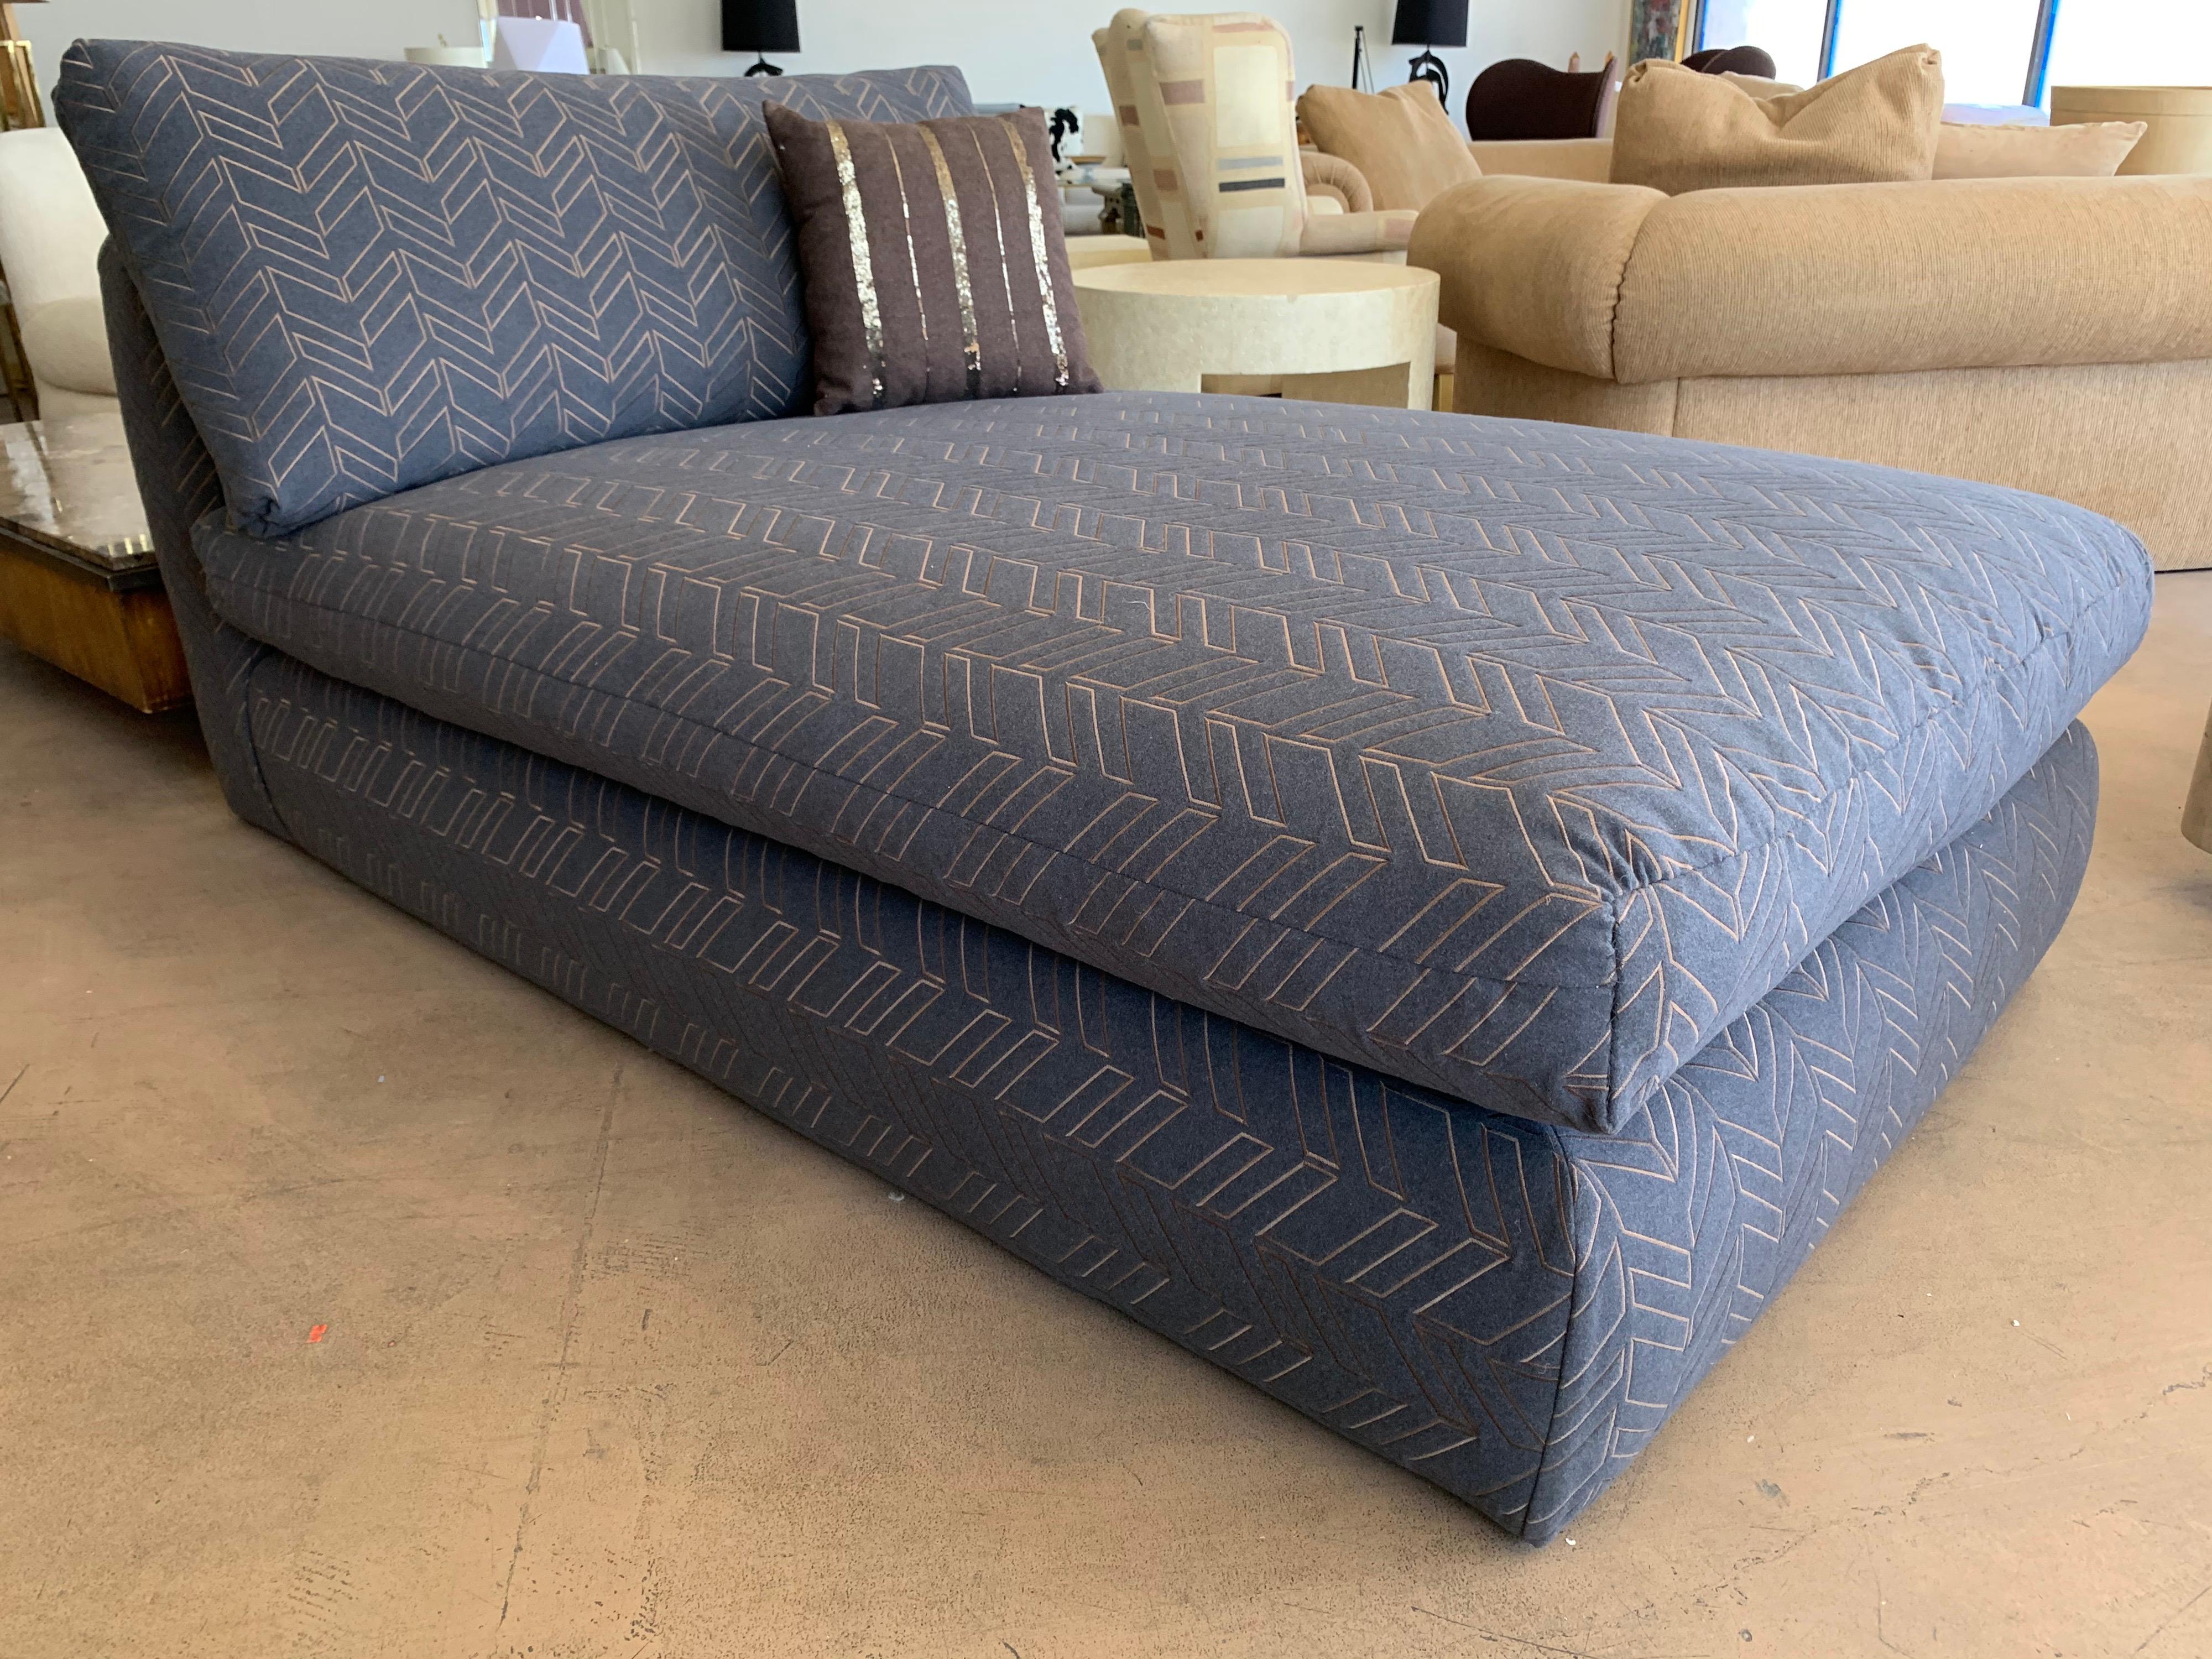 This amazing chaise lounge came from the multimillion dollar Ray Kroc estate that was entirely designed by legendary Steve Chase. We have redone it in a very high-end gray flannel fabric with bronze colored modernist Chevron embroidery. The chaise